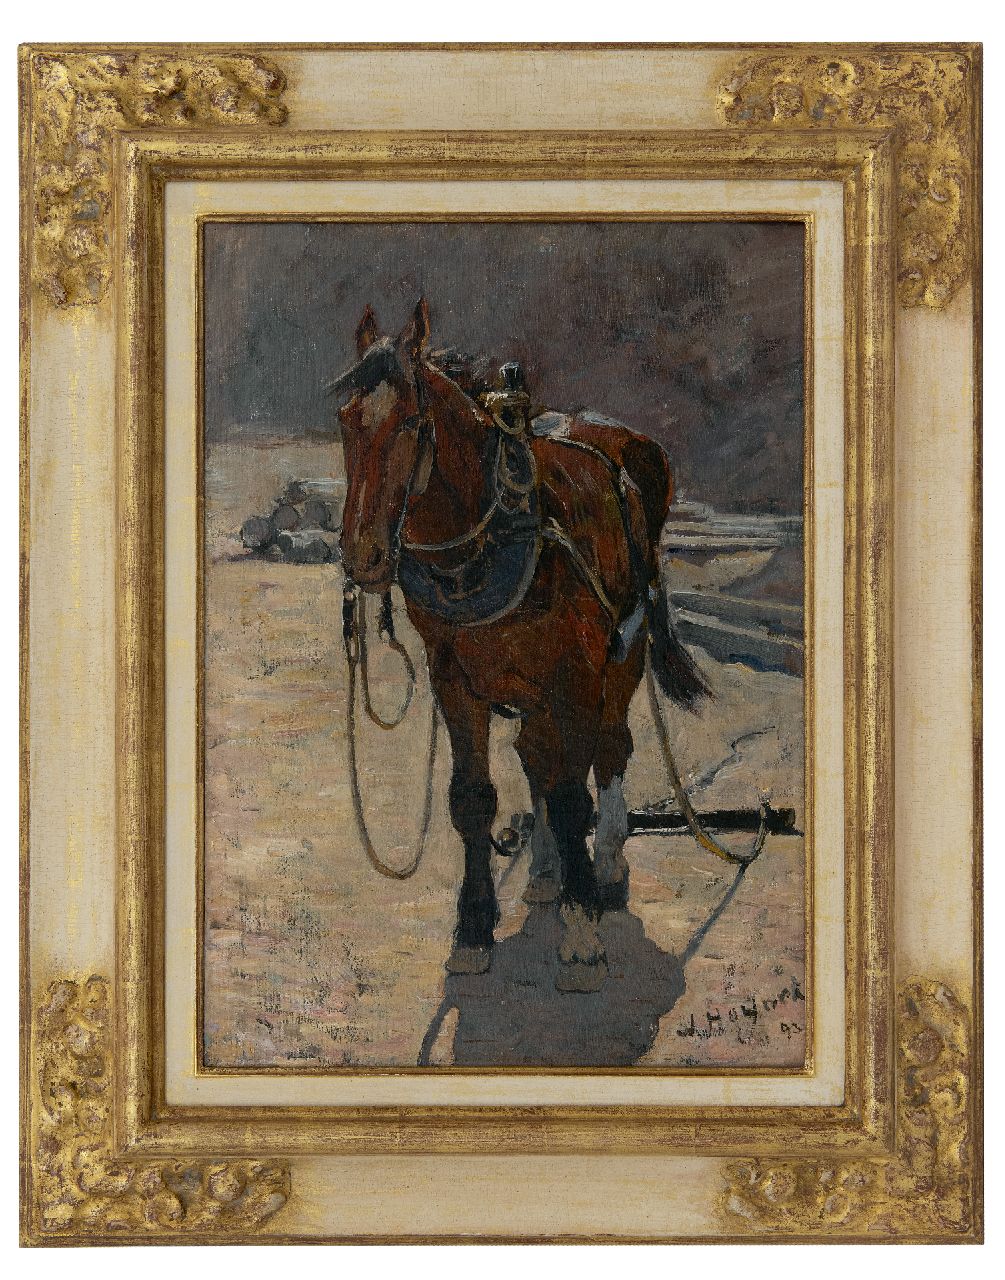 Hoynck van Papendrecht J.  | Jan Hoynck van Papendrecht | Paintings offered for sale | A draught horse, oil on canvas 45.1 x 34.0 cm, signed l.r. and dated '93